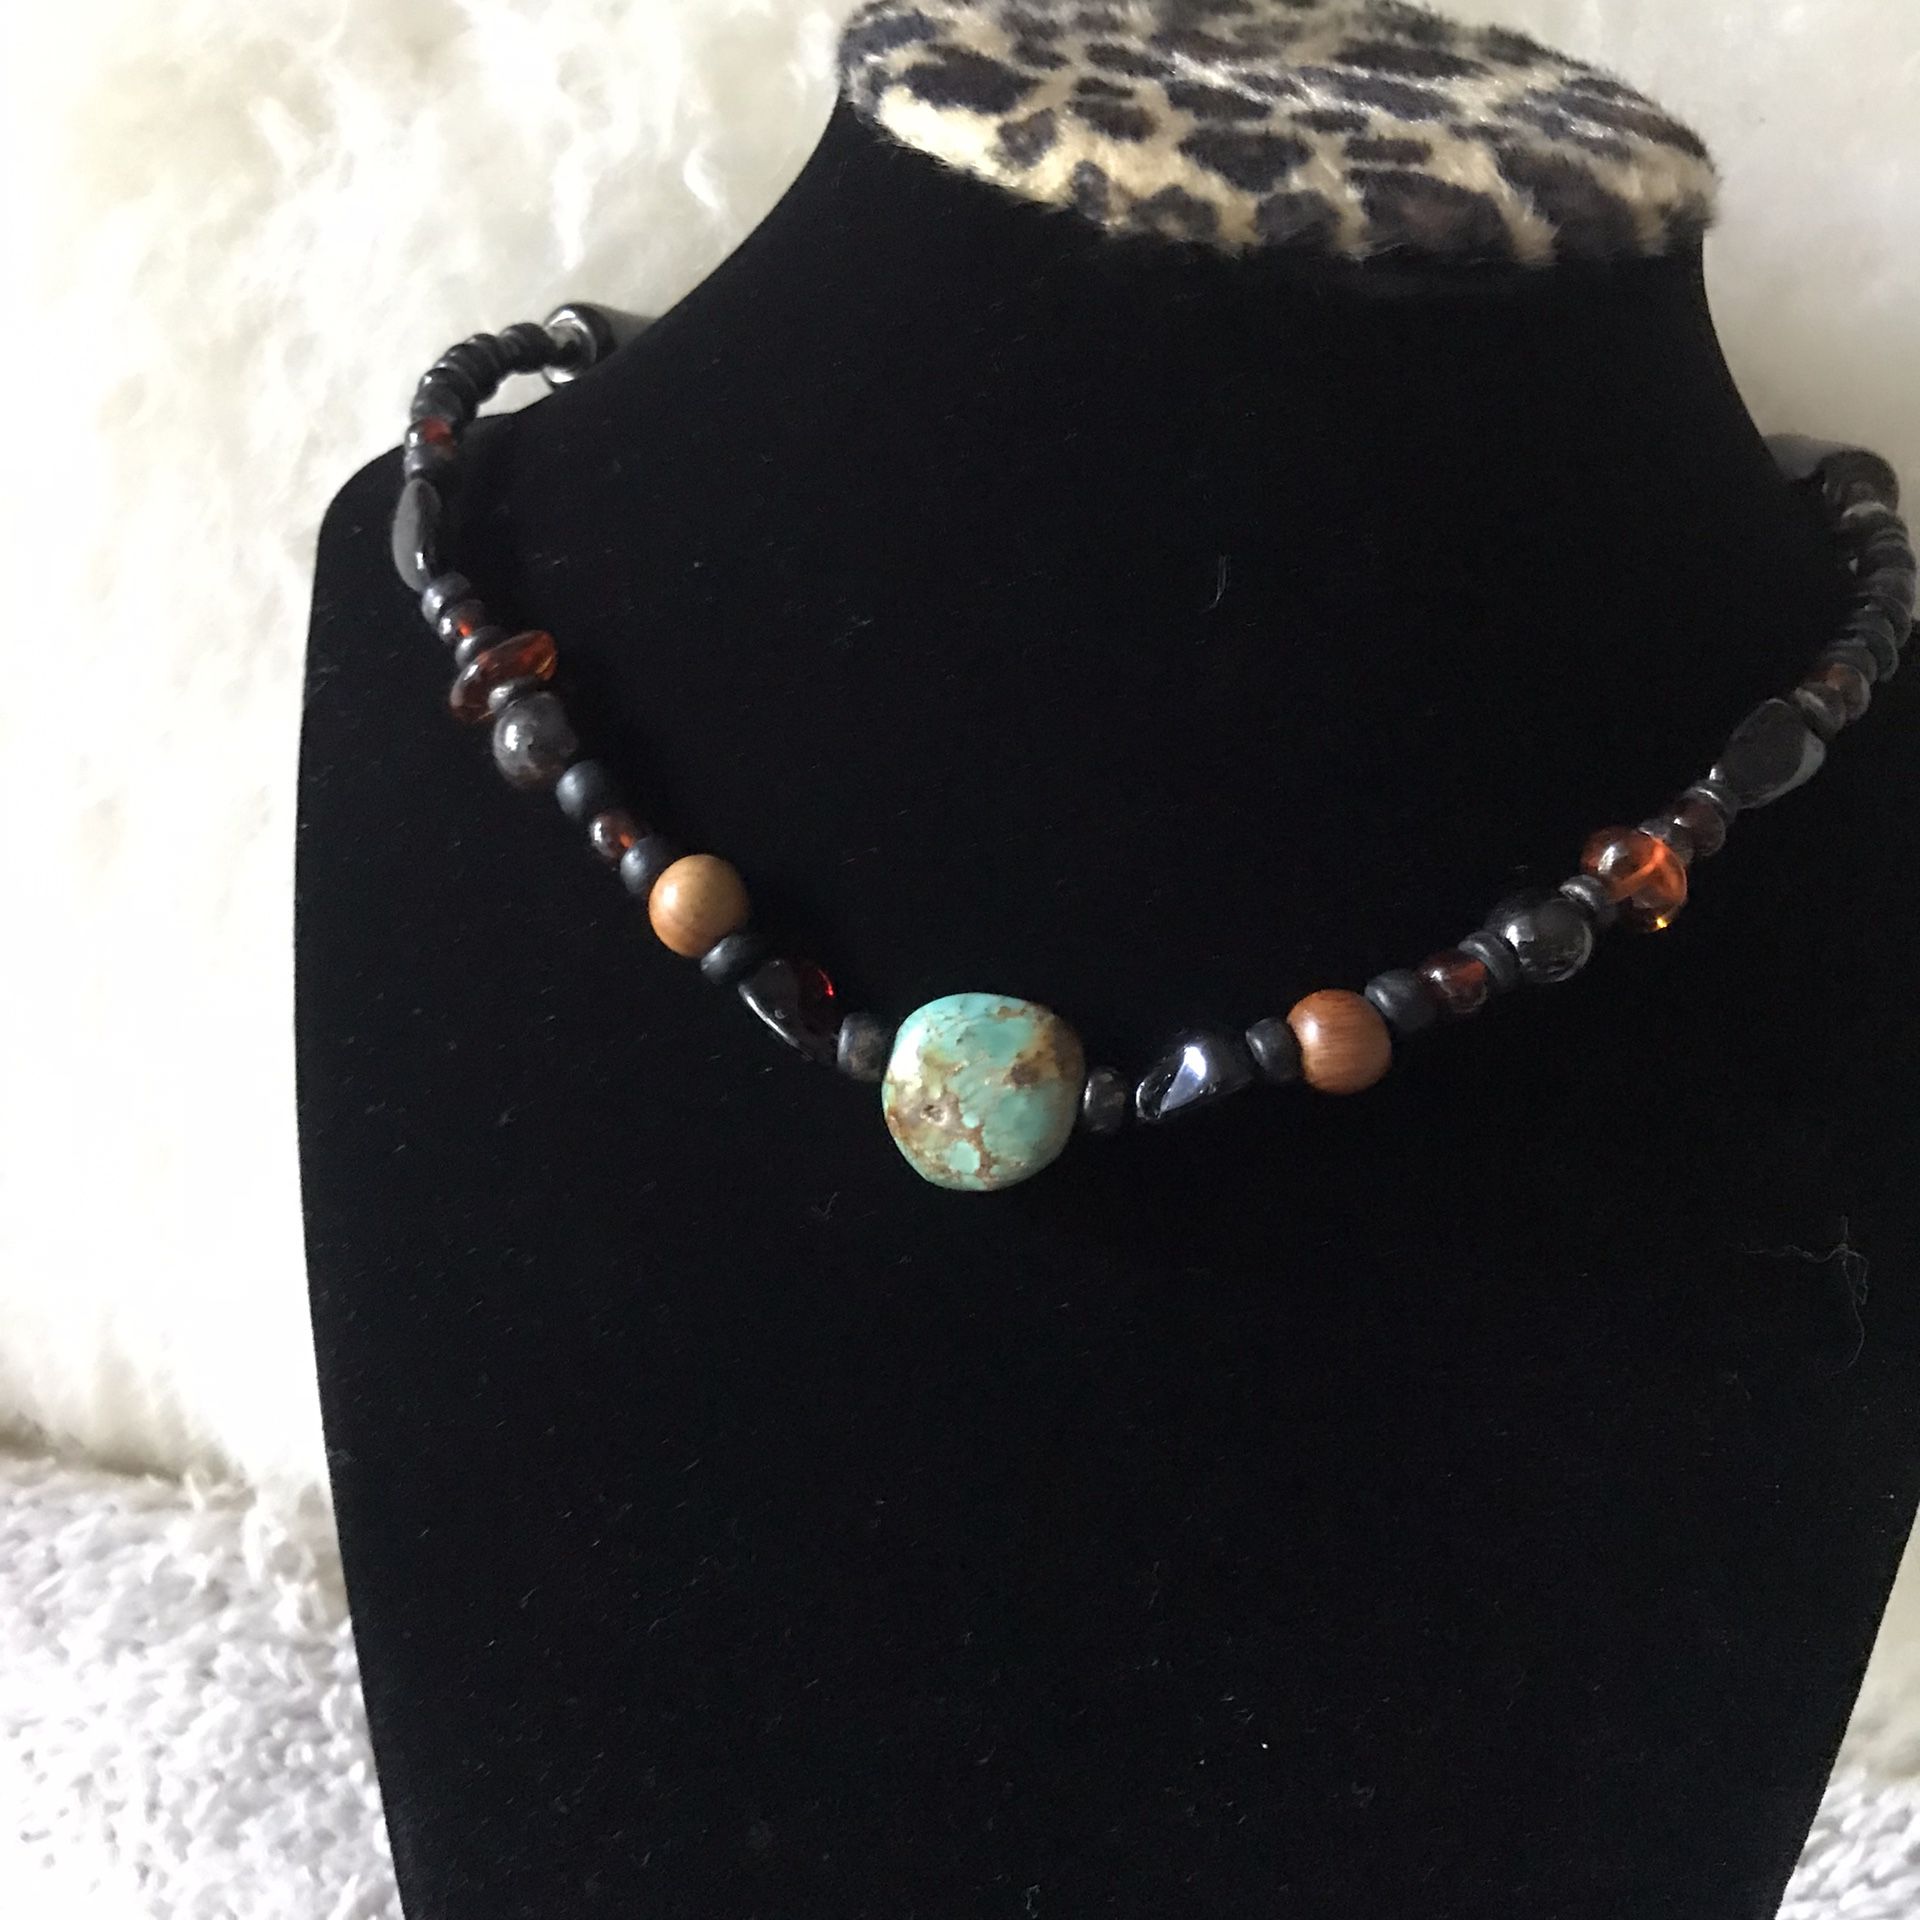 Vintage Real Turquoises Stone, Amber, Onyx And Another Semiprecious Stones Adjustable Necklace.